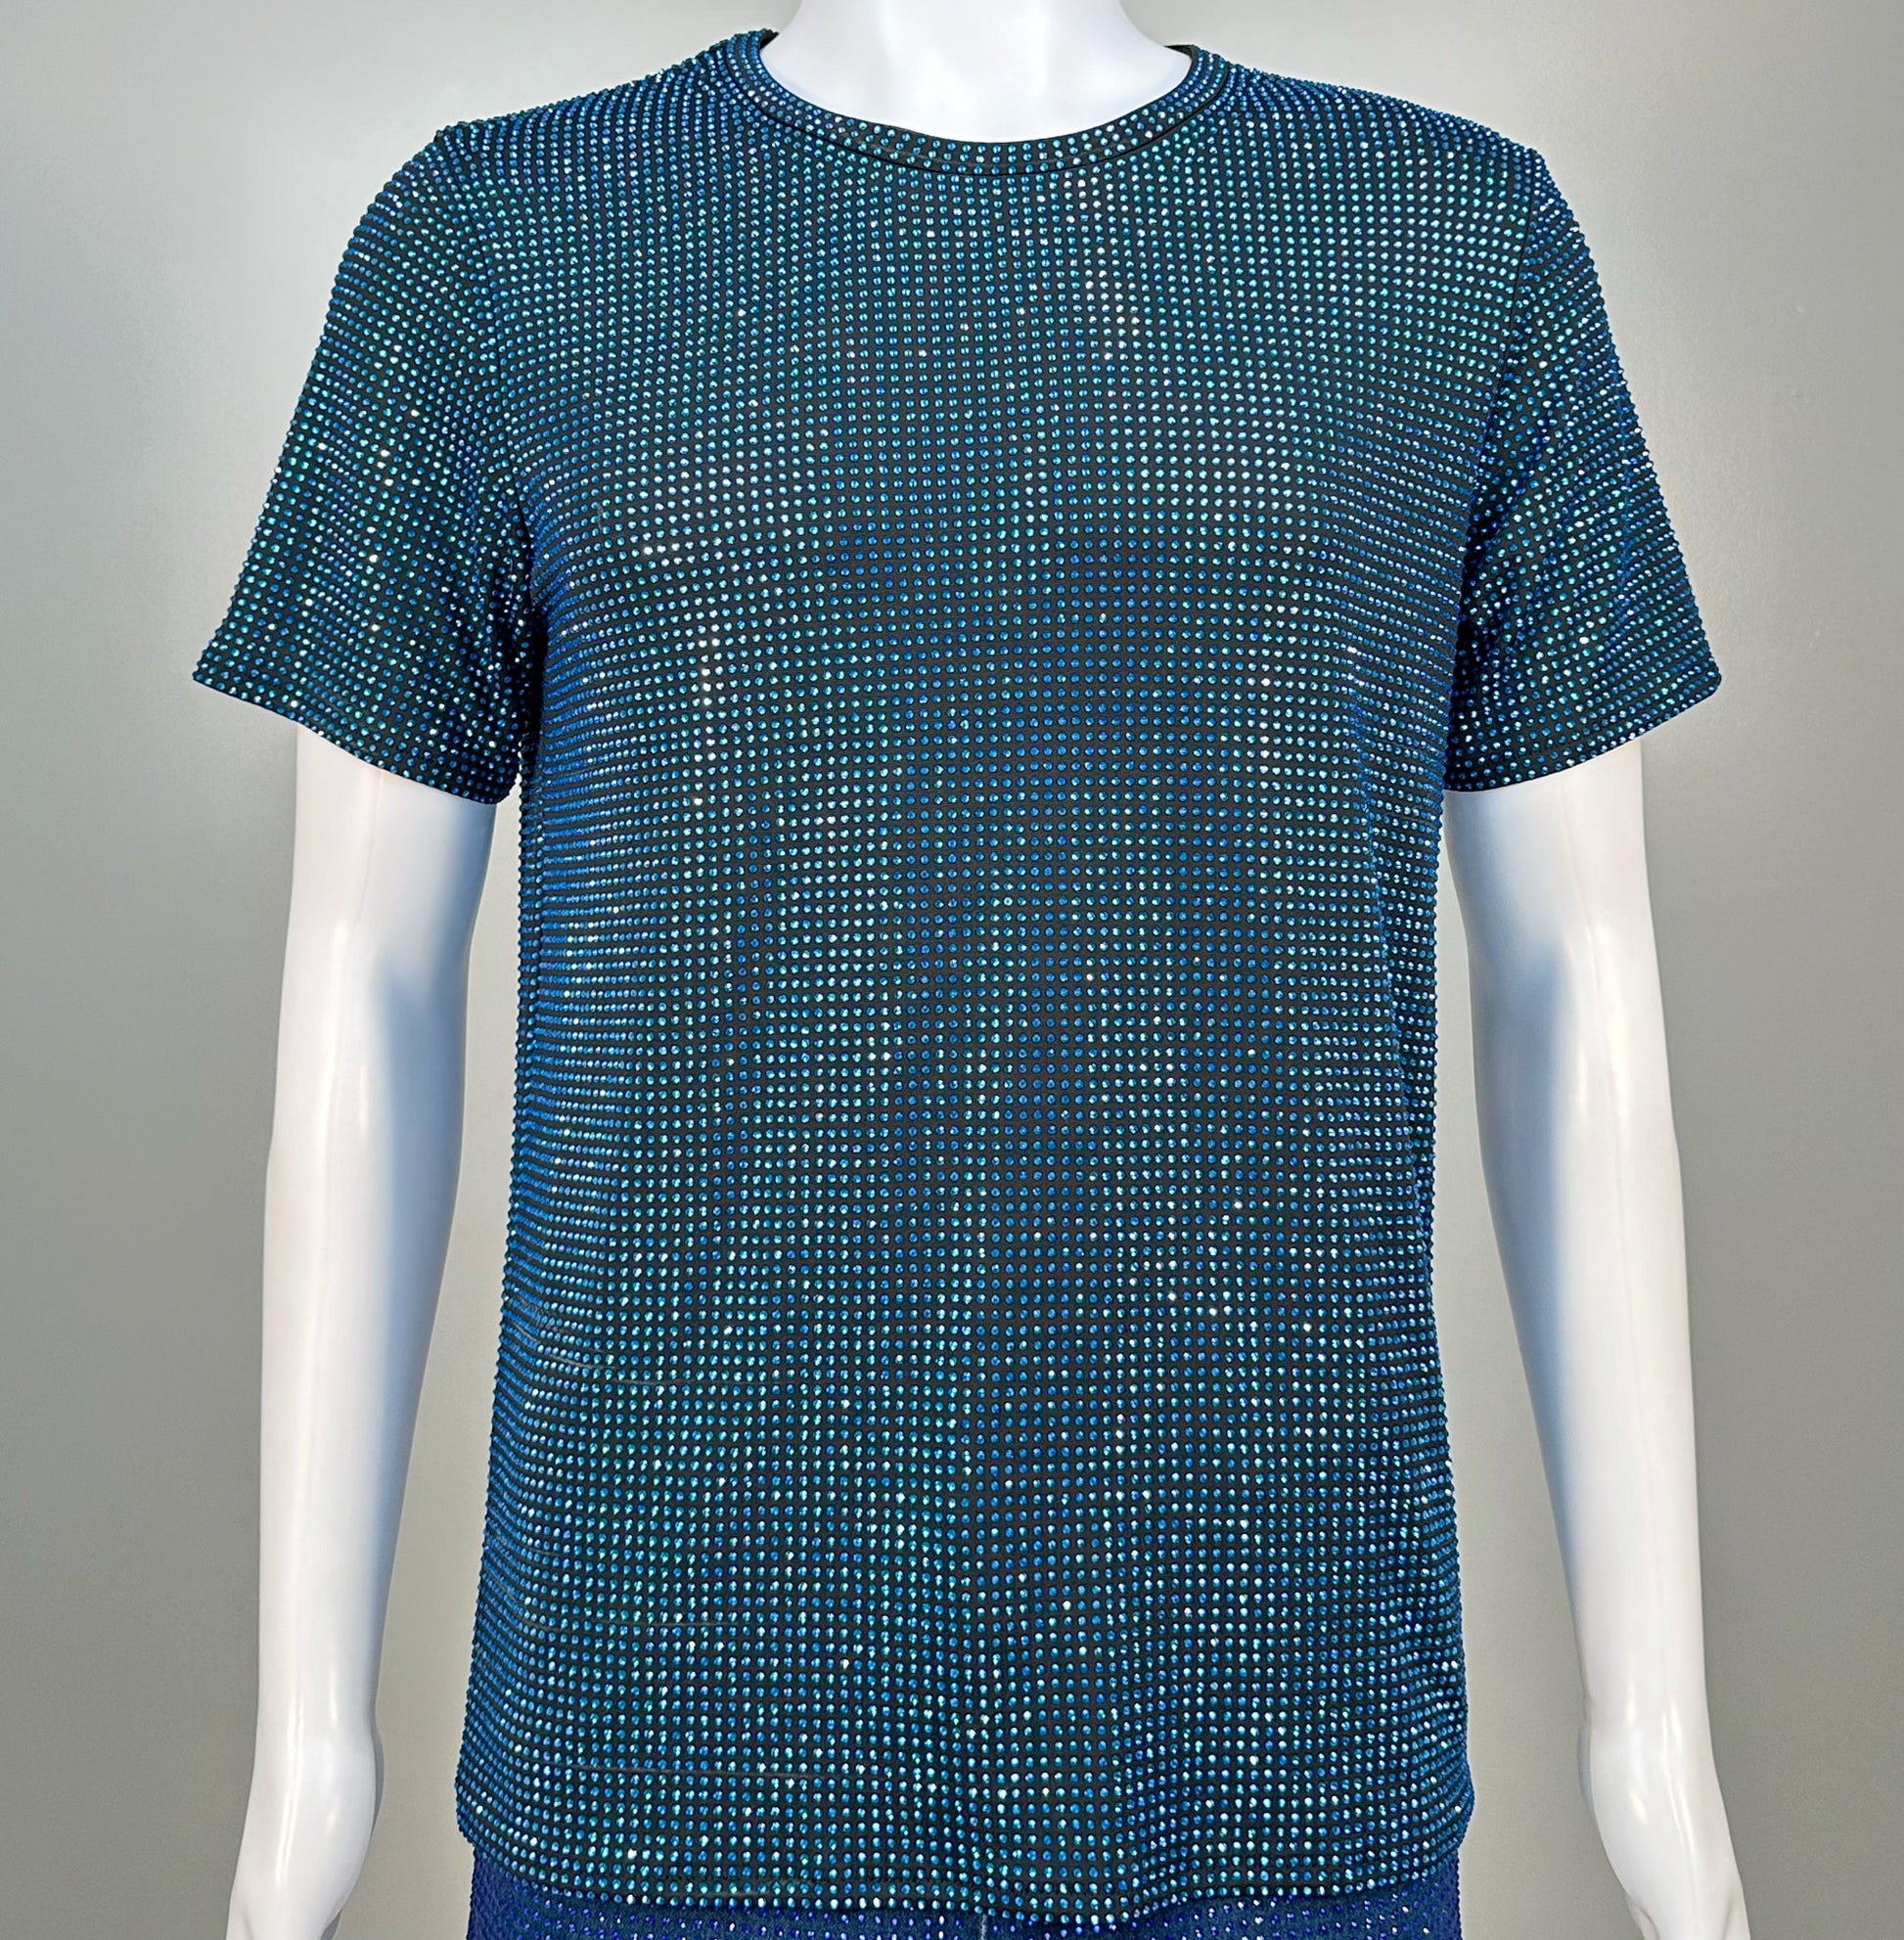 Photo of a sparkling Capri Blue Crystals on Black Fabric T-shirt featuring thousands of crystal rhinestones.